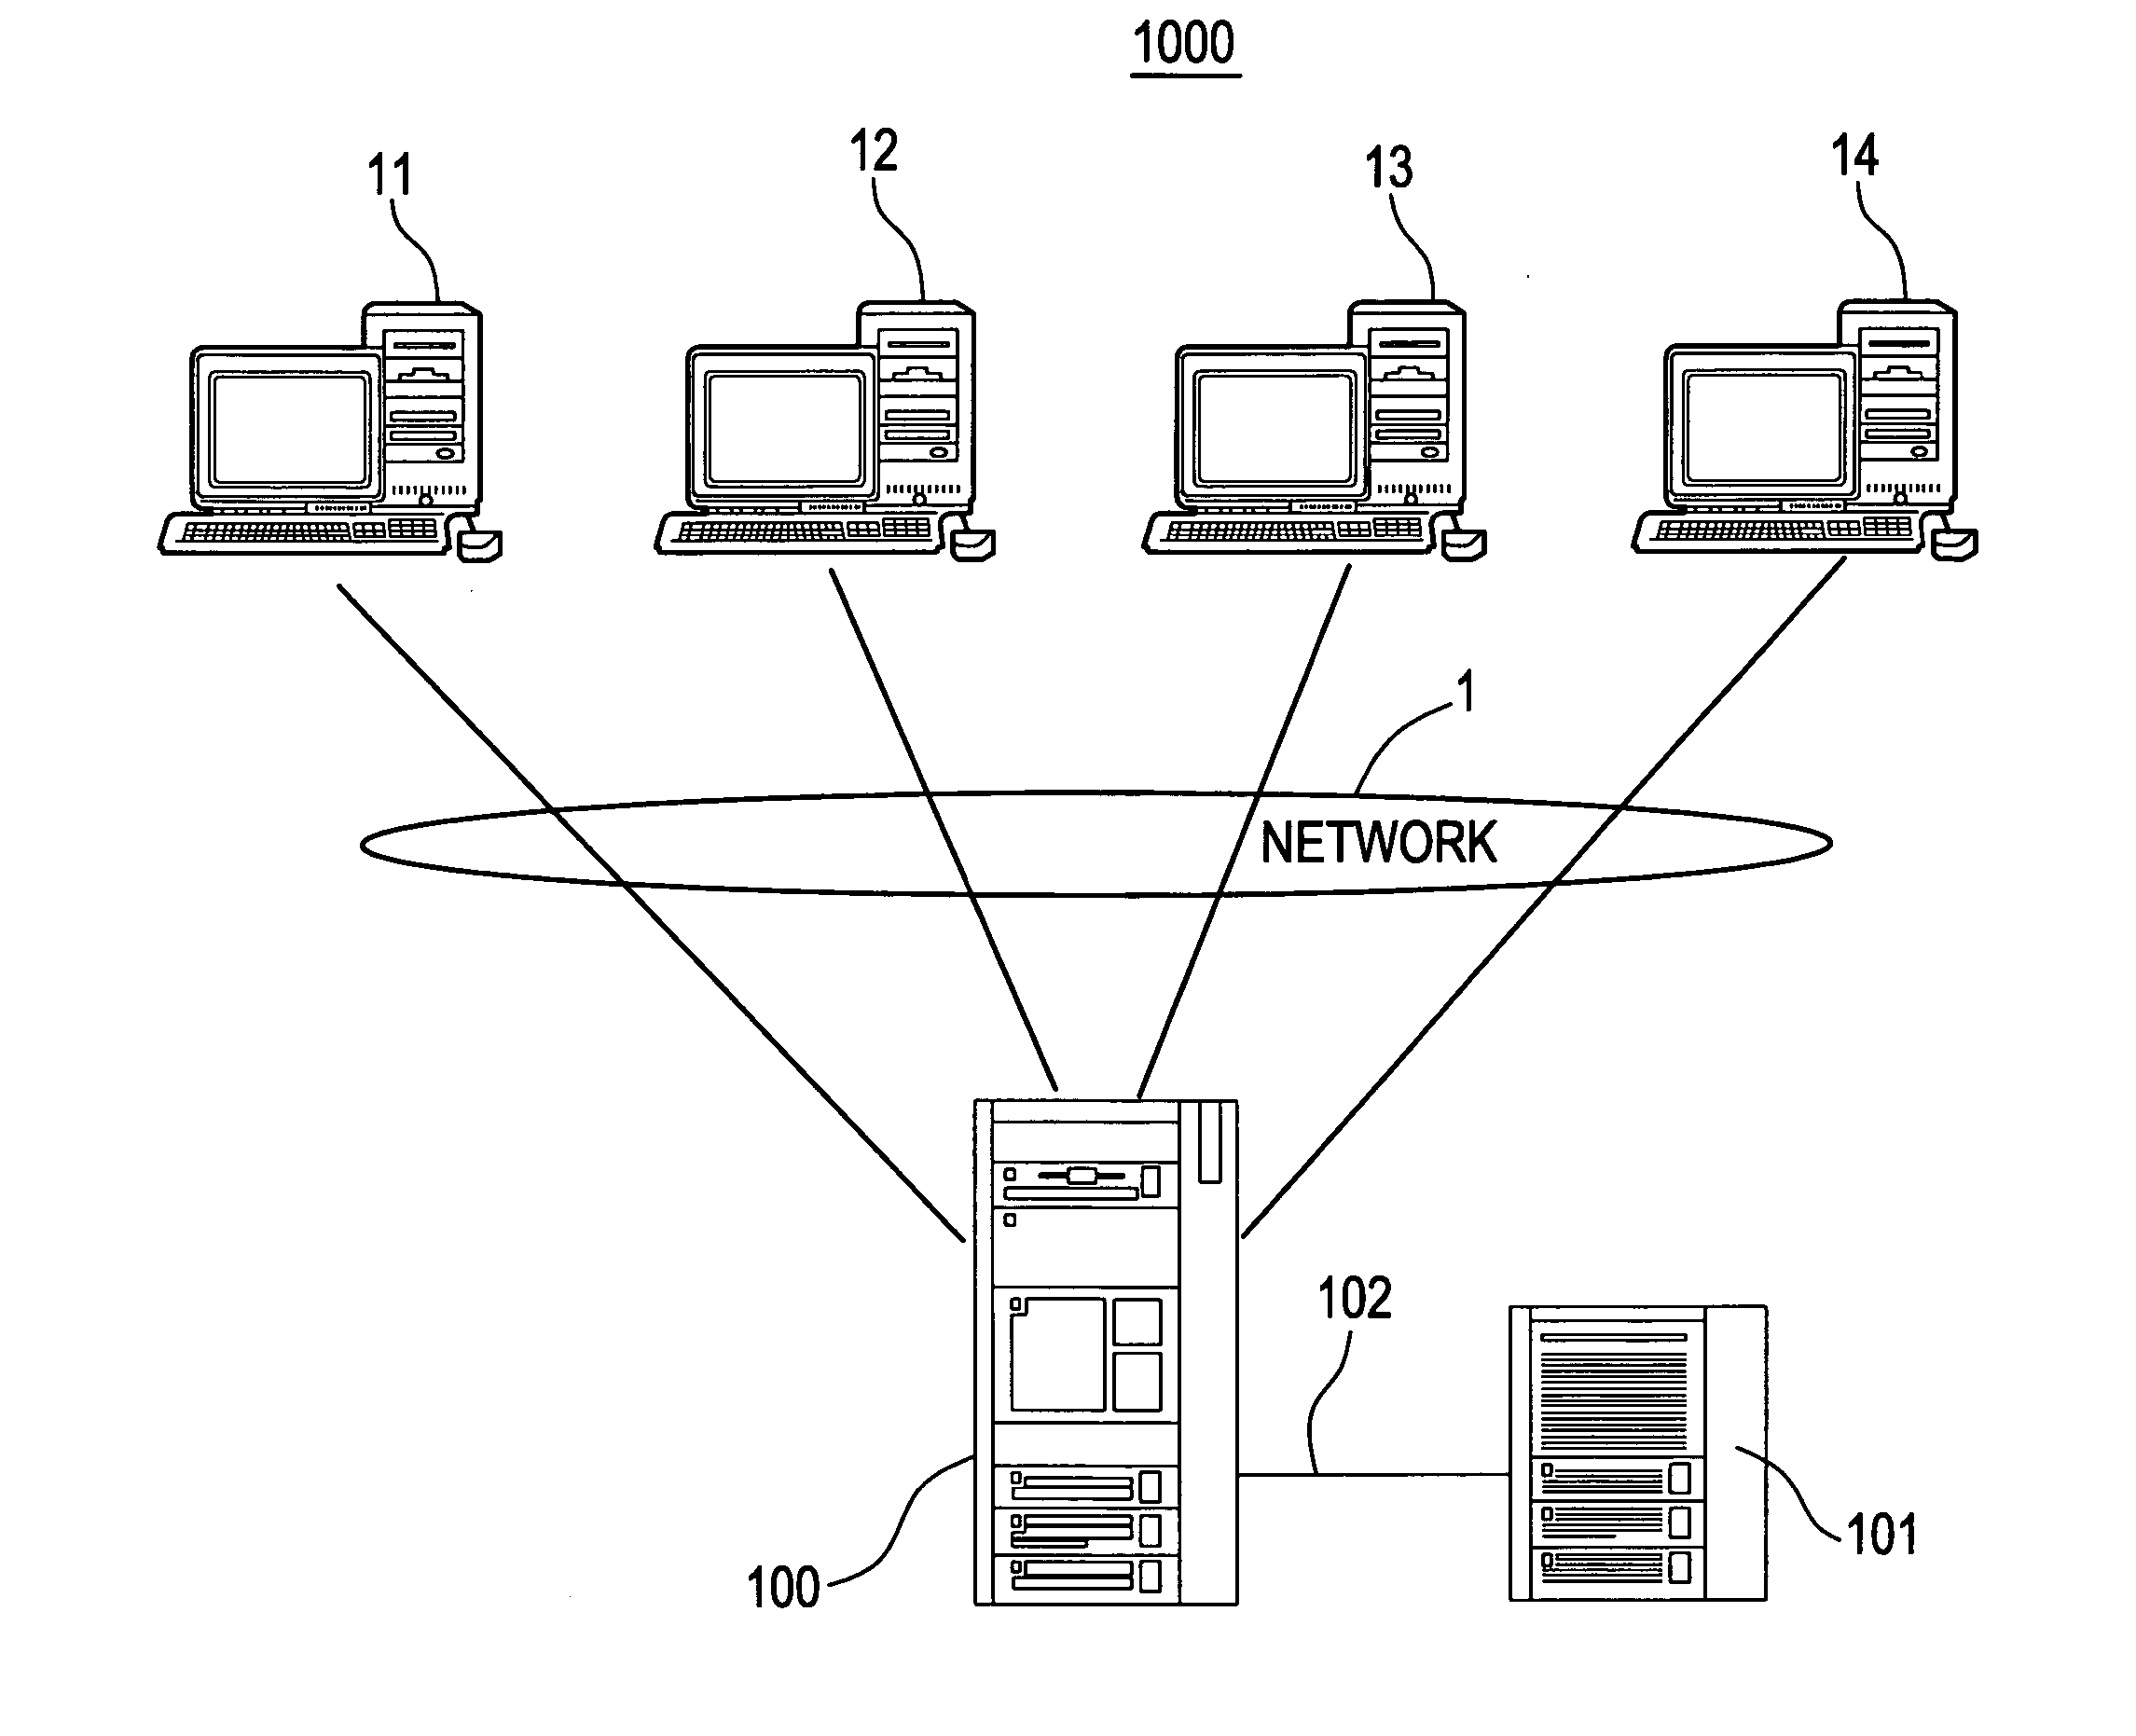 Simulated installation and operation of a diagnostic imaging device at a remote location